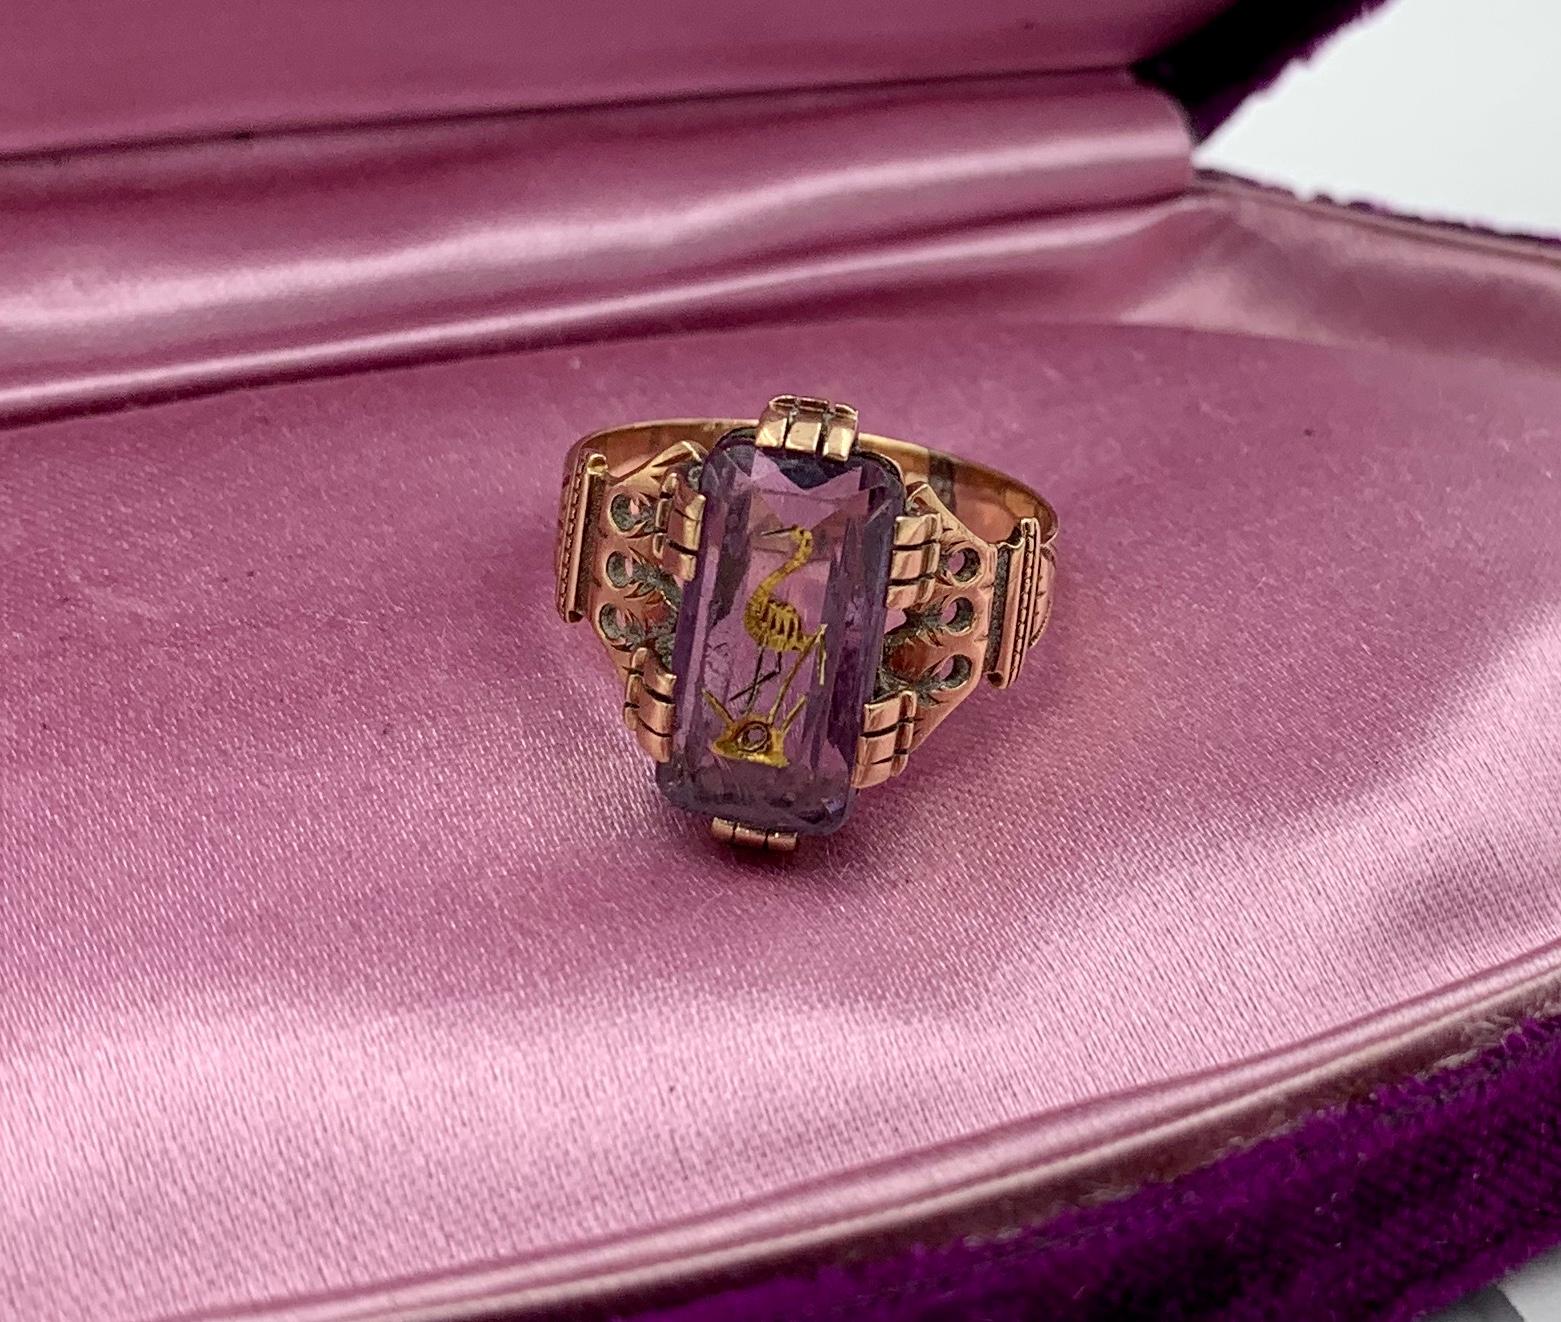 A stunning and rare antique Victorian inlaid intaglio Amethyst Ring with an image of a Stork or Bird in a spectacular crown motif setting in 14 Karat Gold.  The rectangular faceted Amethyst is carved with an image of a Stork.  The intaglio carving